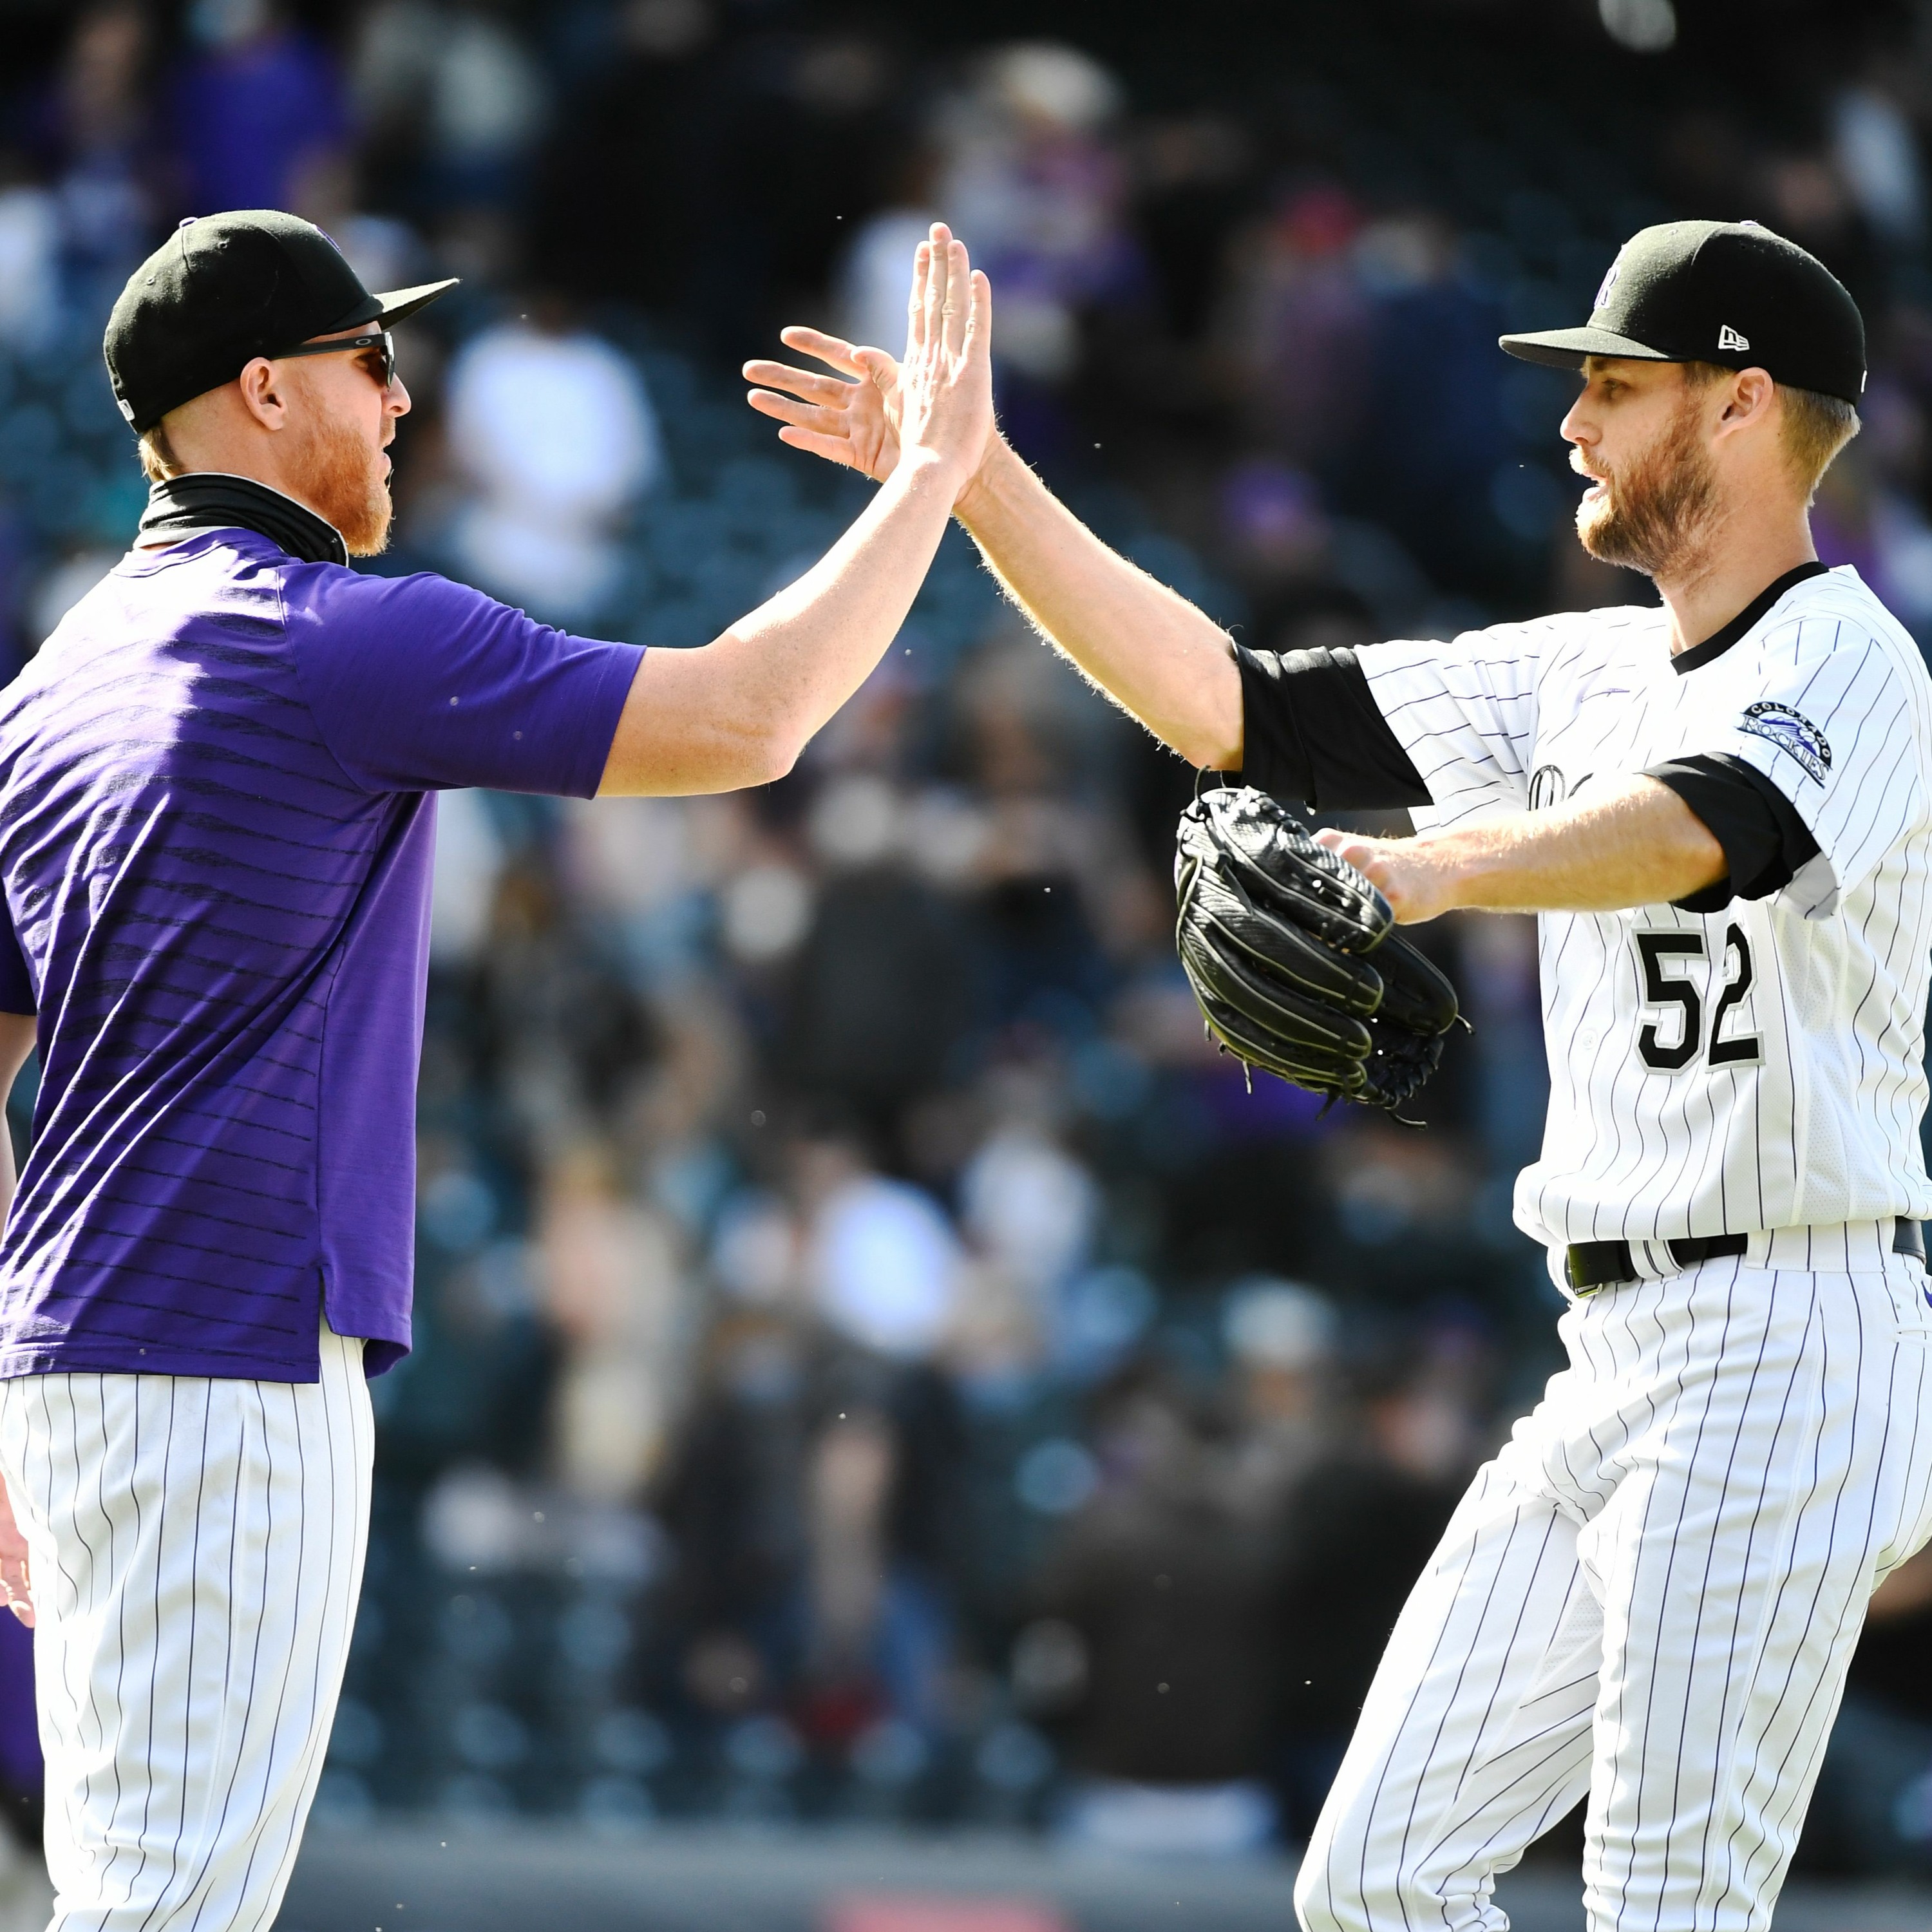 Ep. 175 -- Breaking down the Rockies’ moves (or lack thereof) at the trade deadline